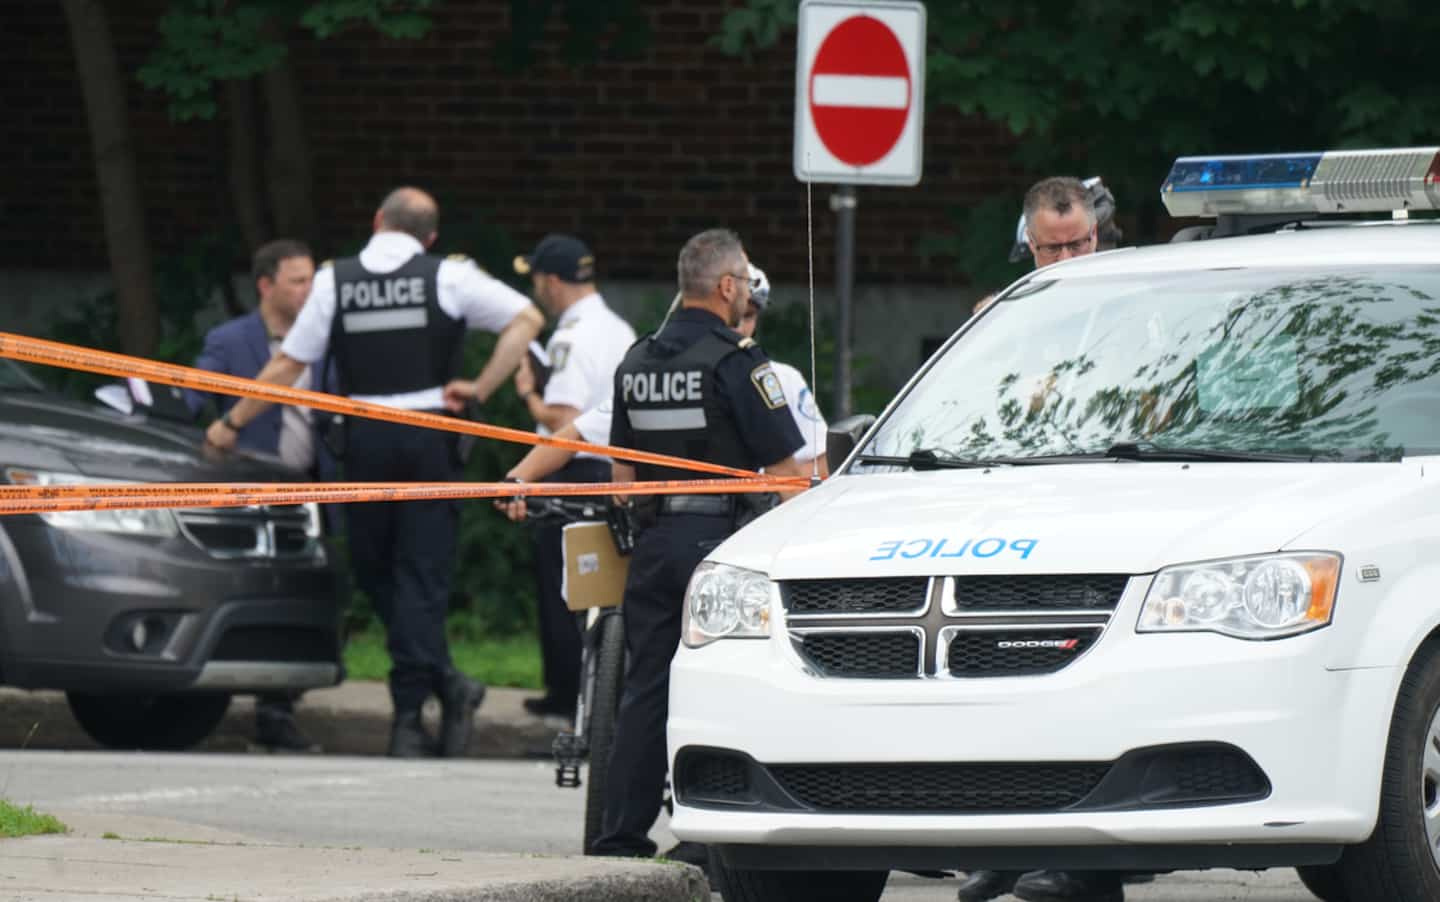 Stabbed by his son, a man lies in critical condition in Montreal